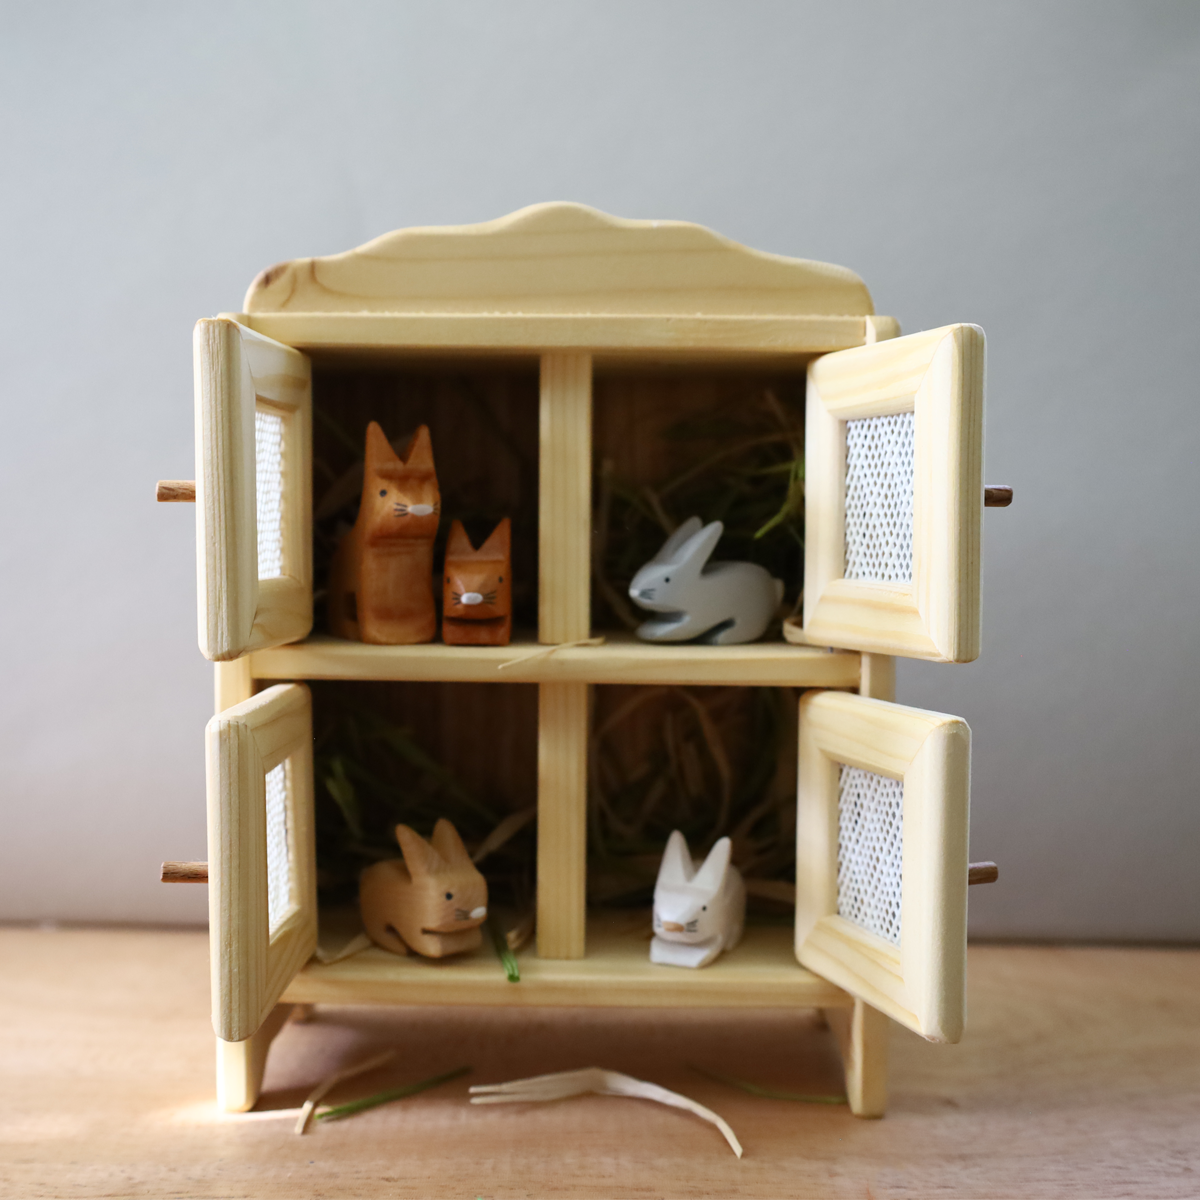 Pre-Order Atelier des Peupliers Rabbit Hutch (Ships in May)